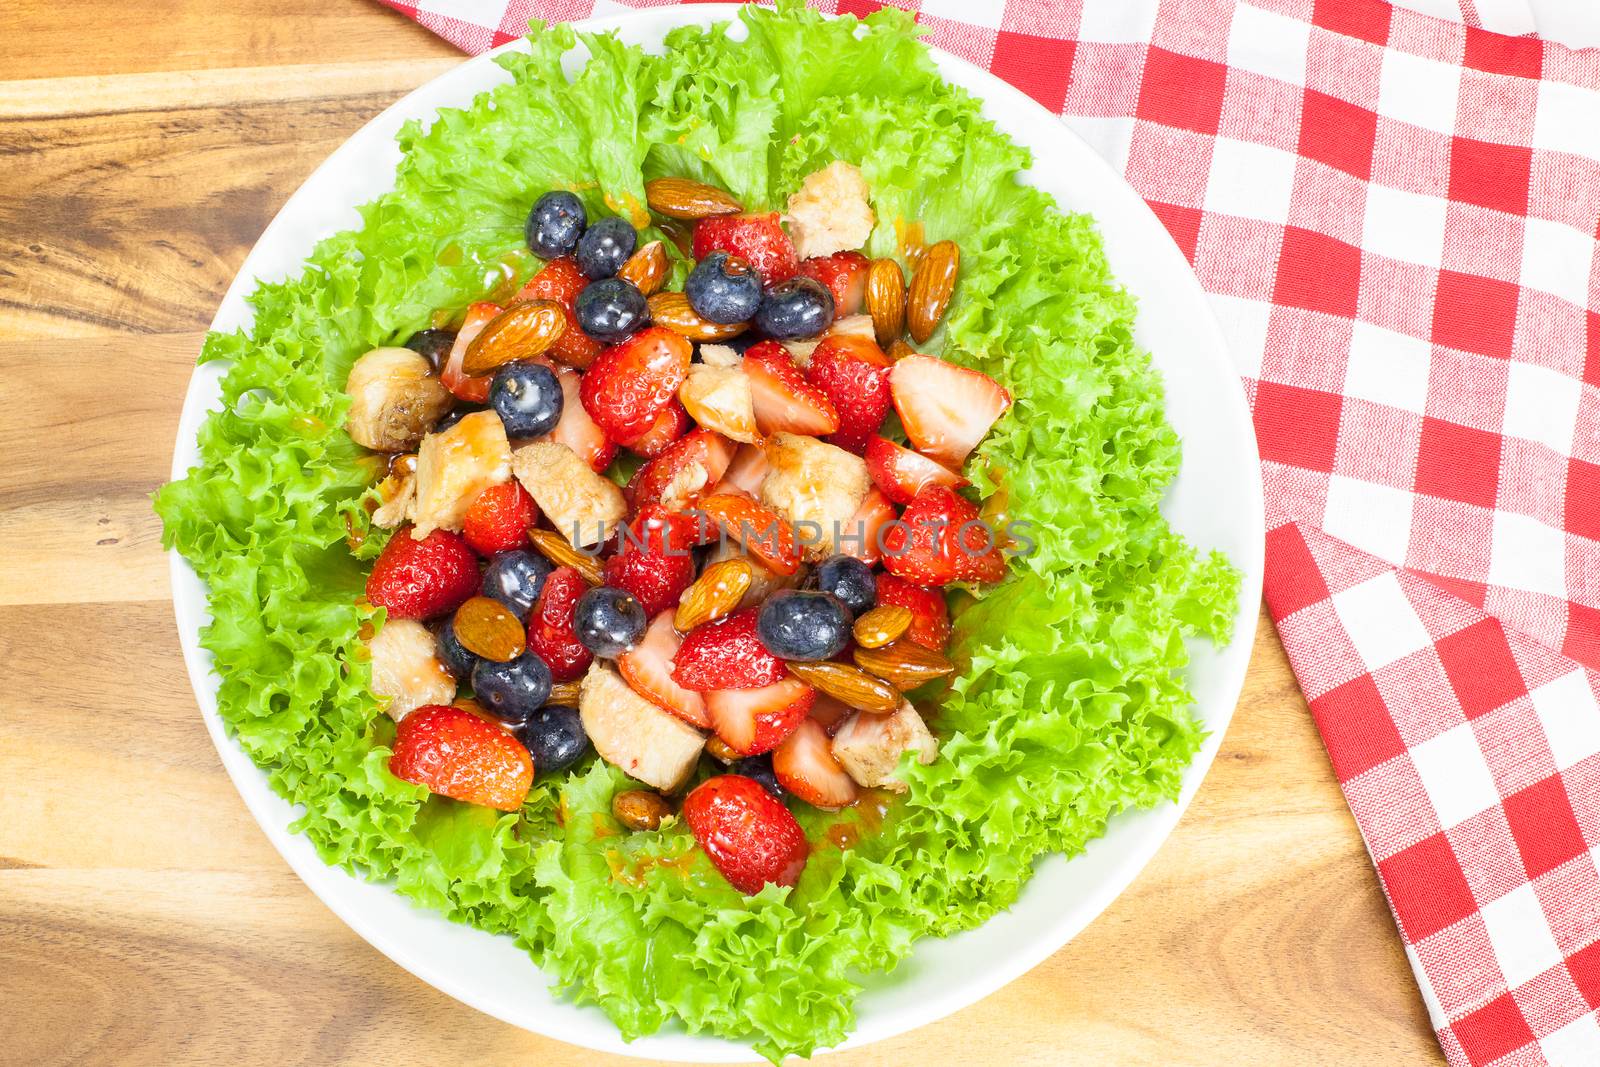 Mixed berry salad with chicken, almond and lettuce. Summer salad. Viewed from above